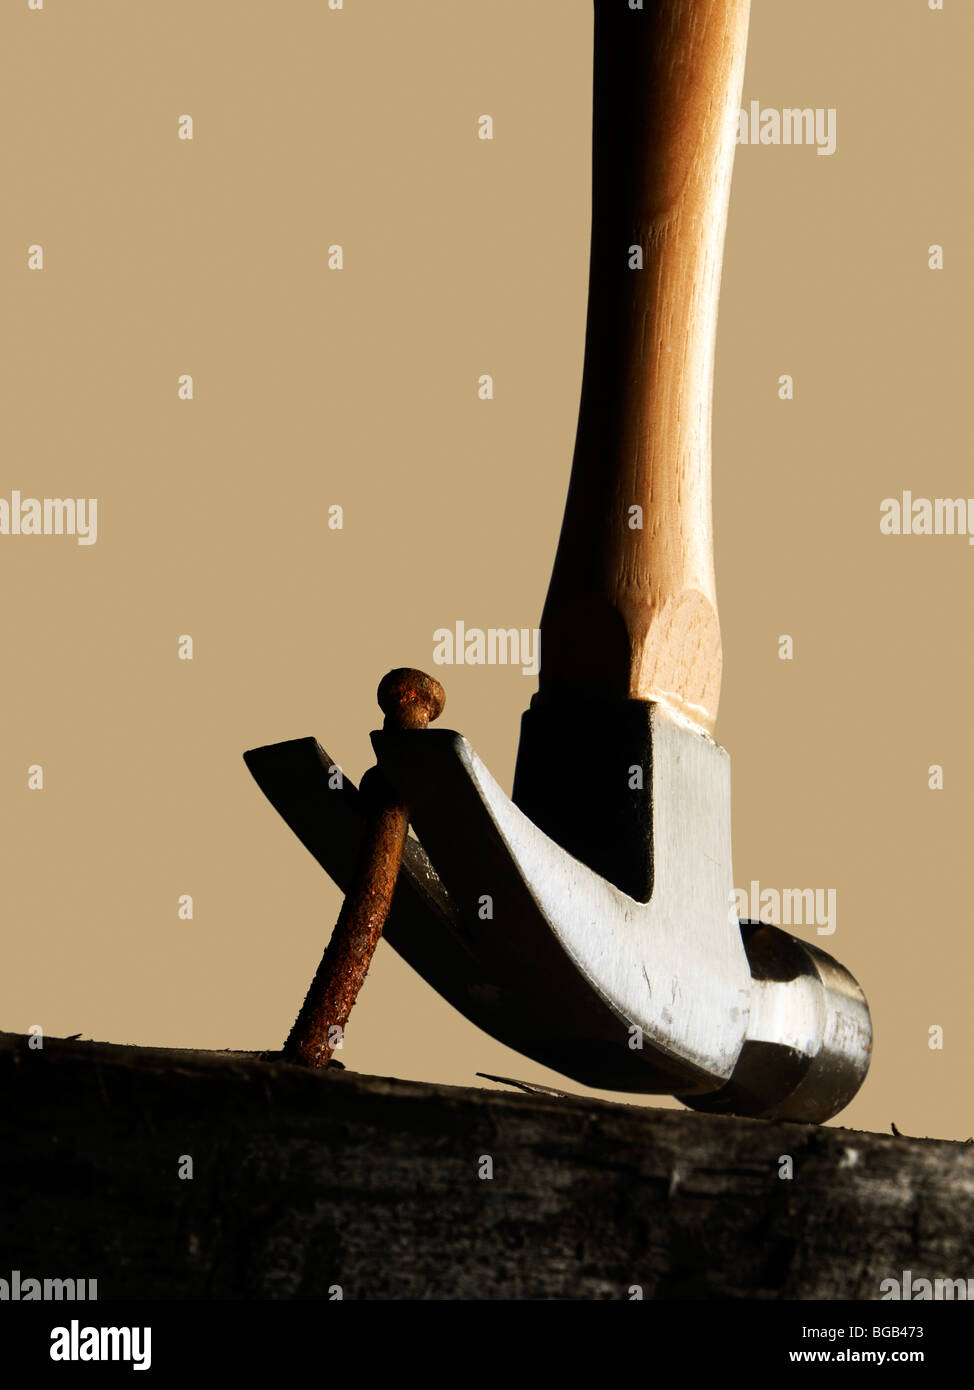 Hammer Removing A Nail From A Wooden Surface Stock Photo